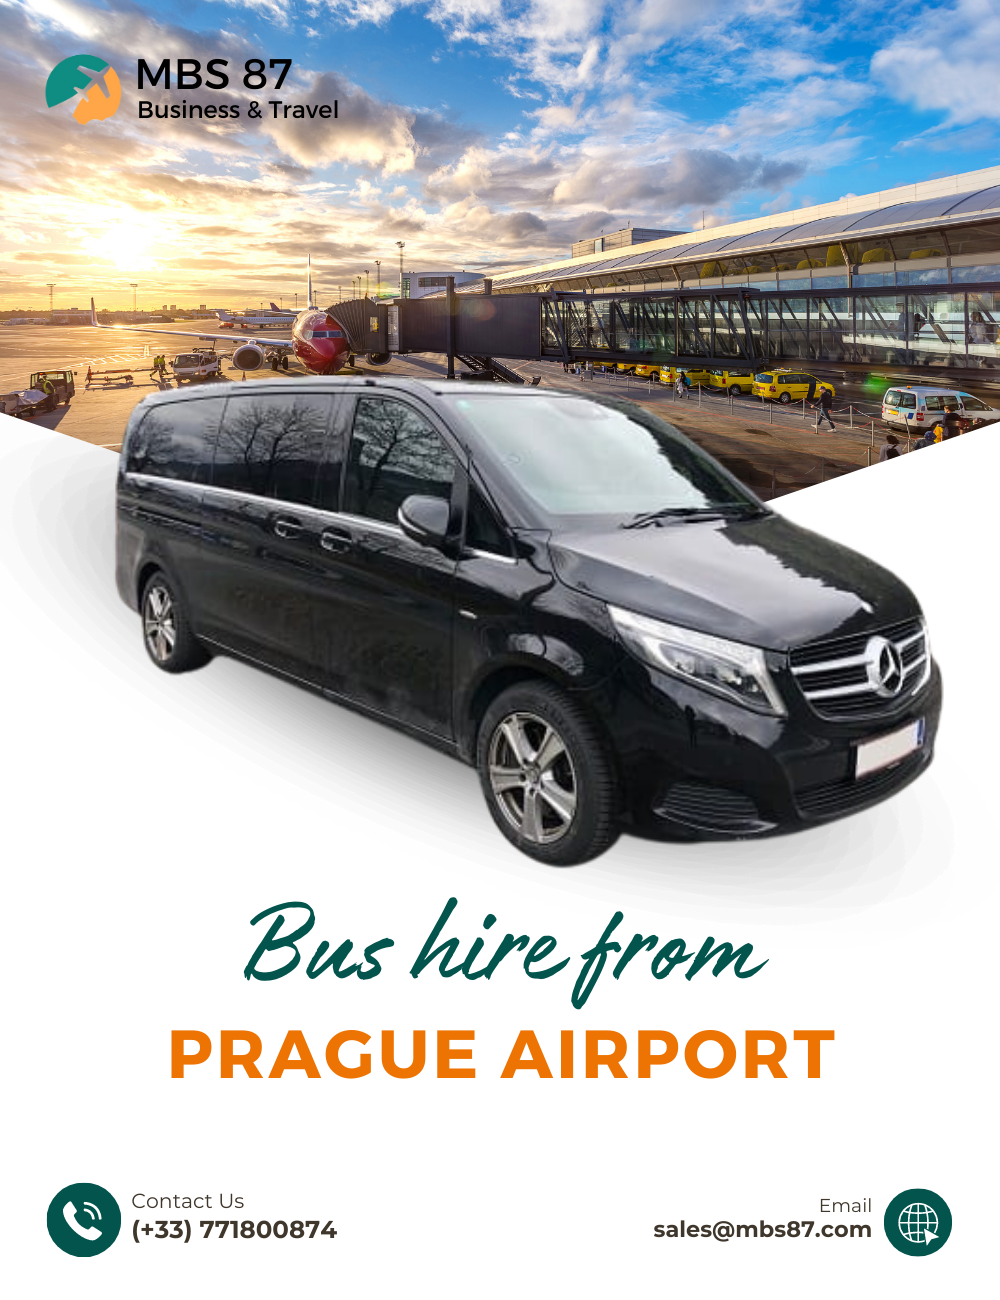 How to Make the Most of Your Airport Transfer Experience in Prague